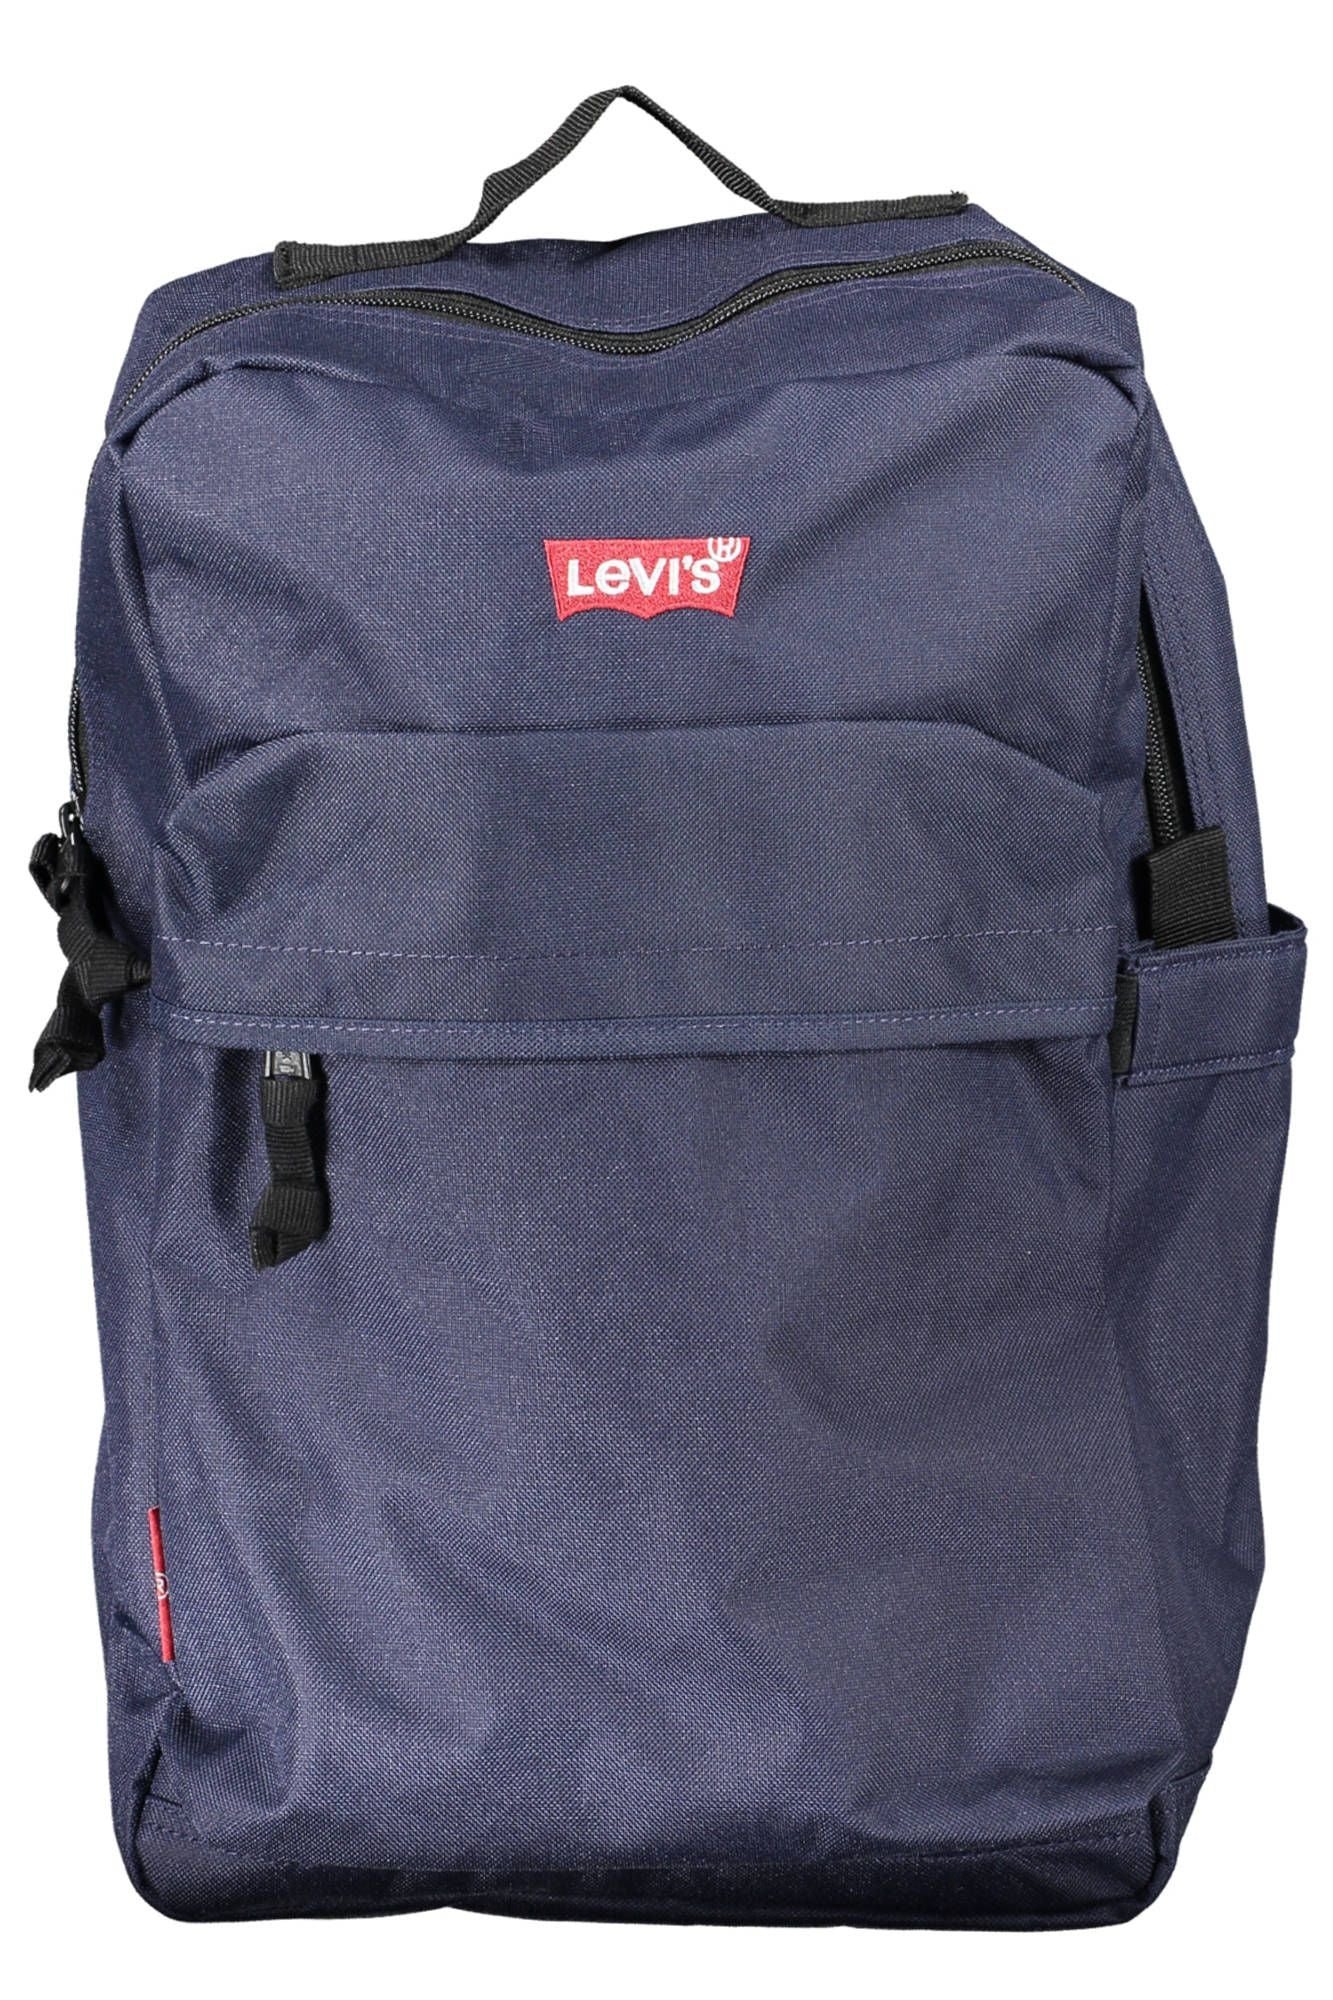 Levi's blue urban backpack with embroidered logo